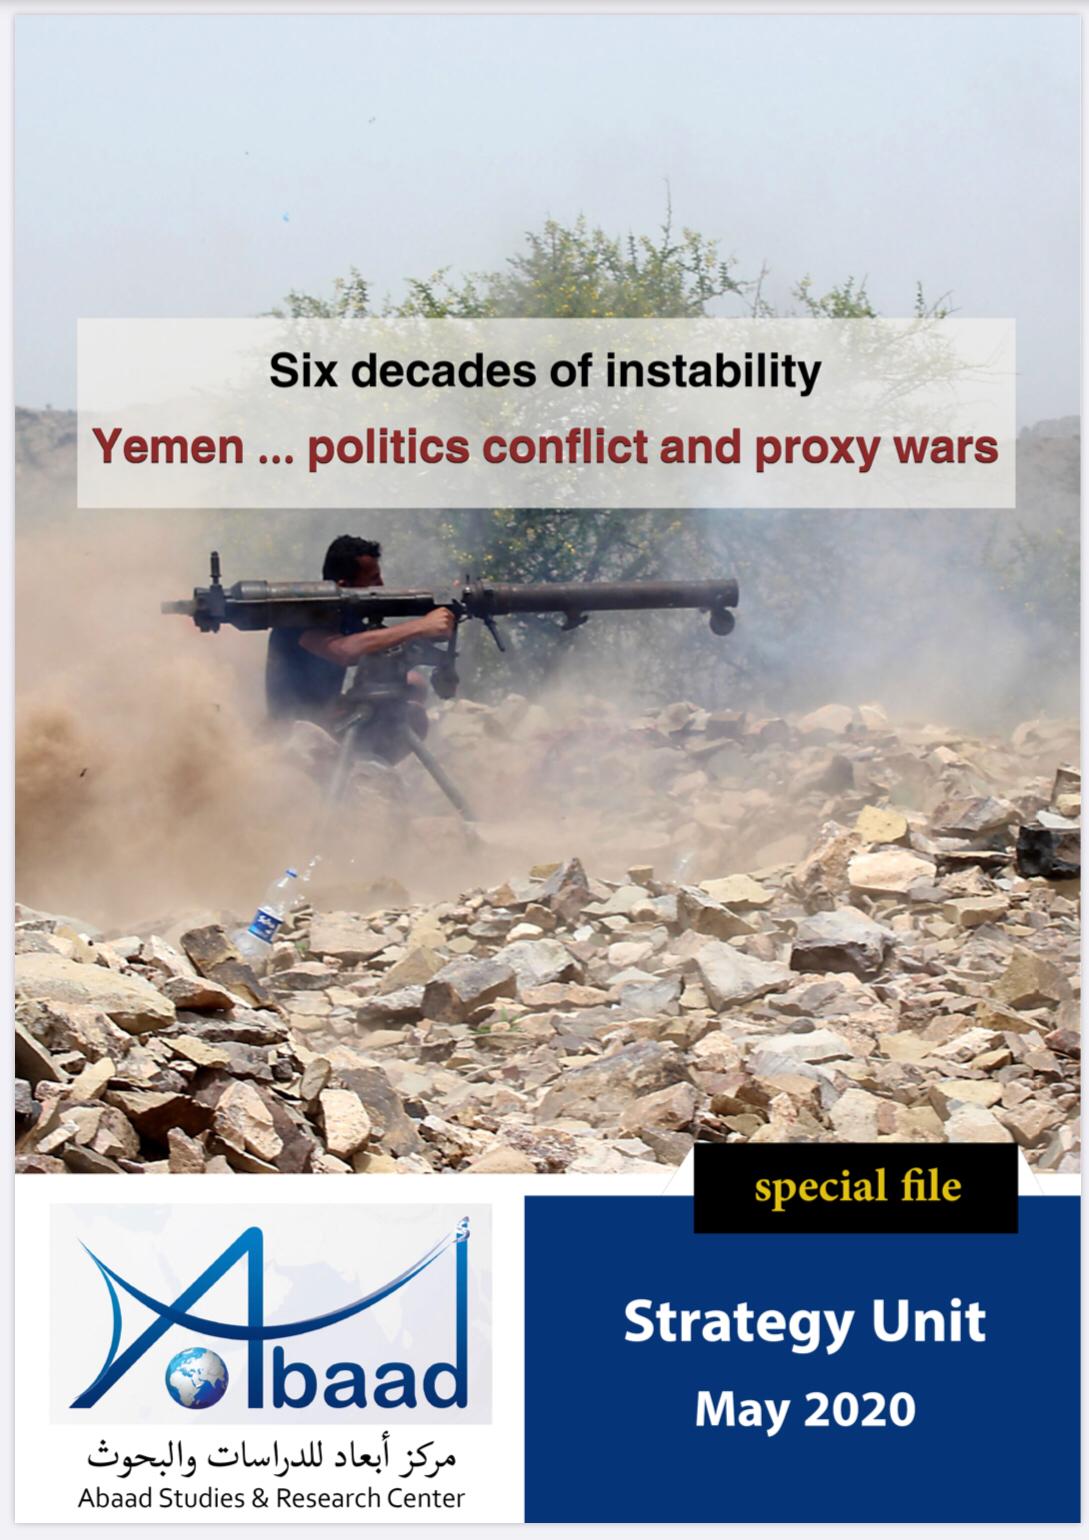  Six decades of instability.. Yemen: politics conflict and proxy wars